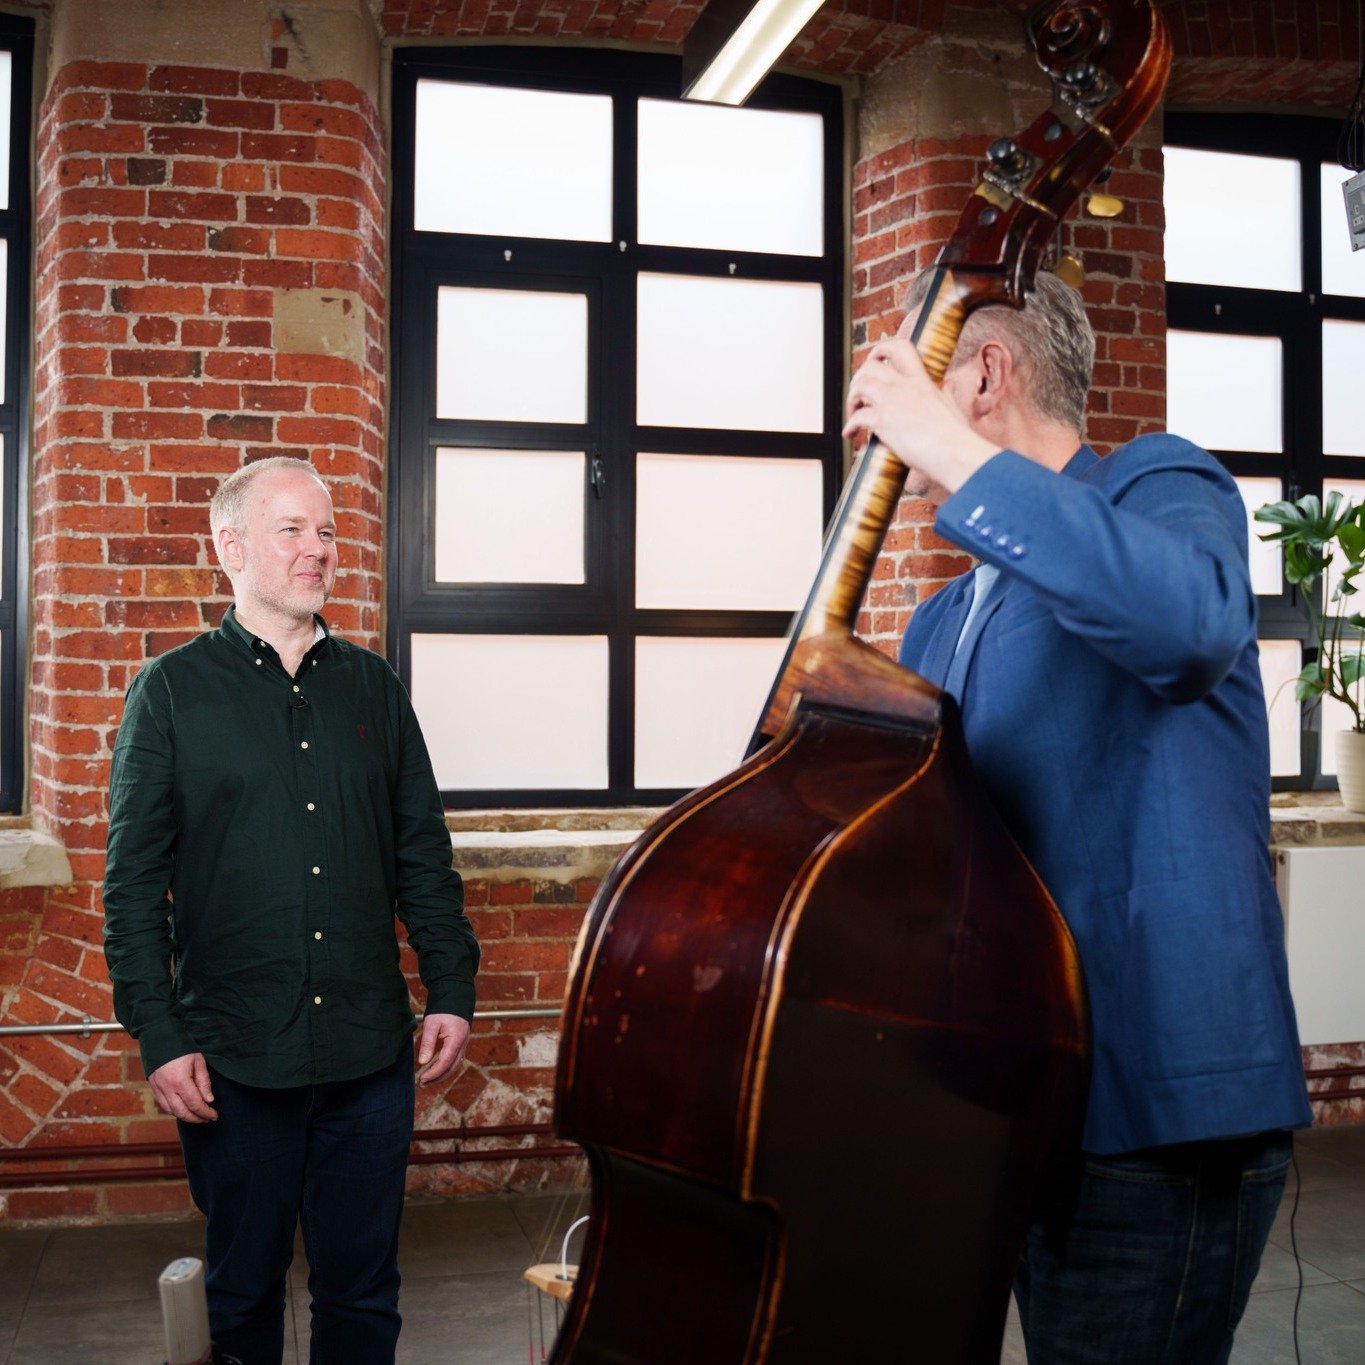 Our latest YouTube video with a giant of the bass world is due out later today. There's some incredible bass playing and deep discussion! 

#doublebass #contrabass #uprightbass #baixoacustico #baixonatural #kontrabass #contrabasso #bassplayer #basspl